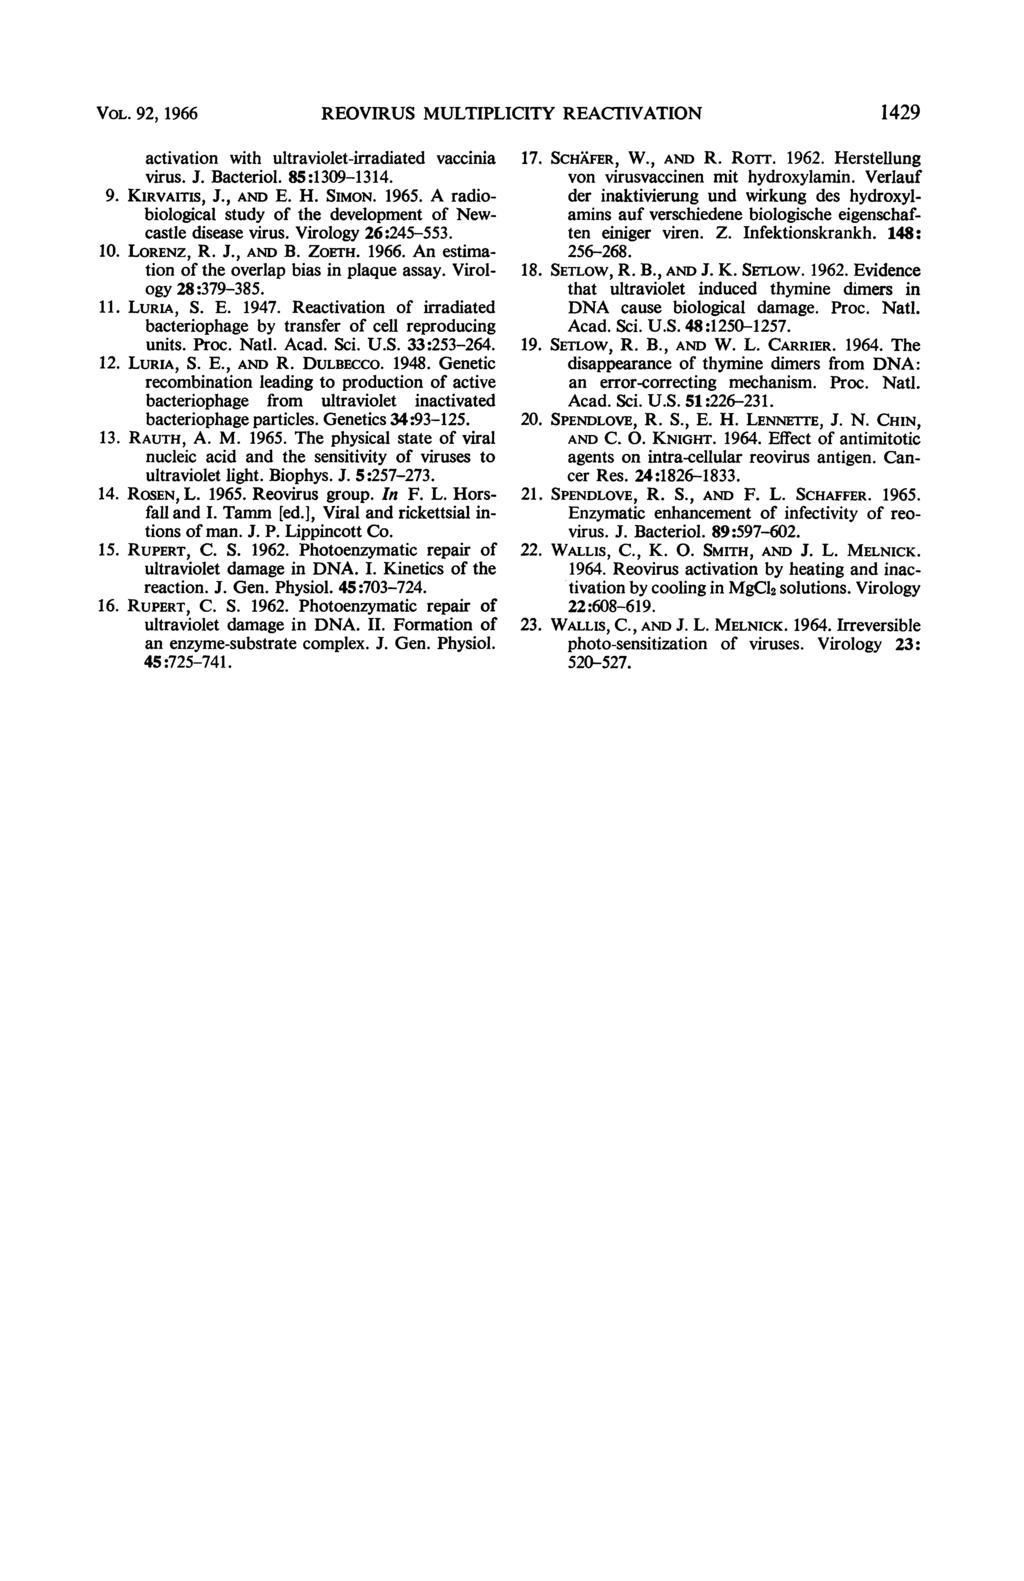 VOL. 92, 1966 REOVIRUS MULTIPLICITY REACITIVATION 1429 activation with ultraviolet-irradiated vaccinia virus. J. Bacteriol. 85:1309-1314. 9. KIRVAITIS, J., AND E. H. SIMON. 1965.